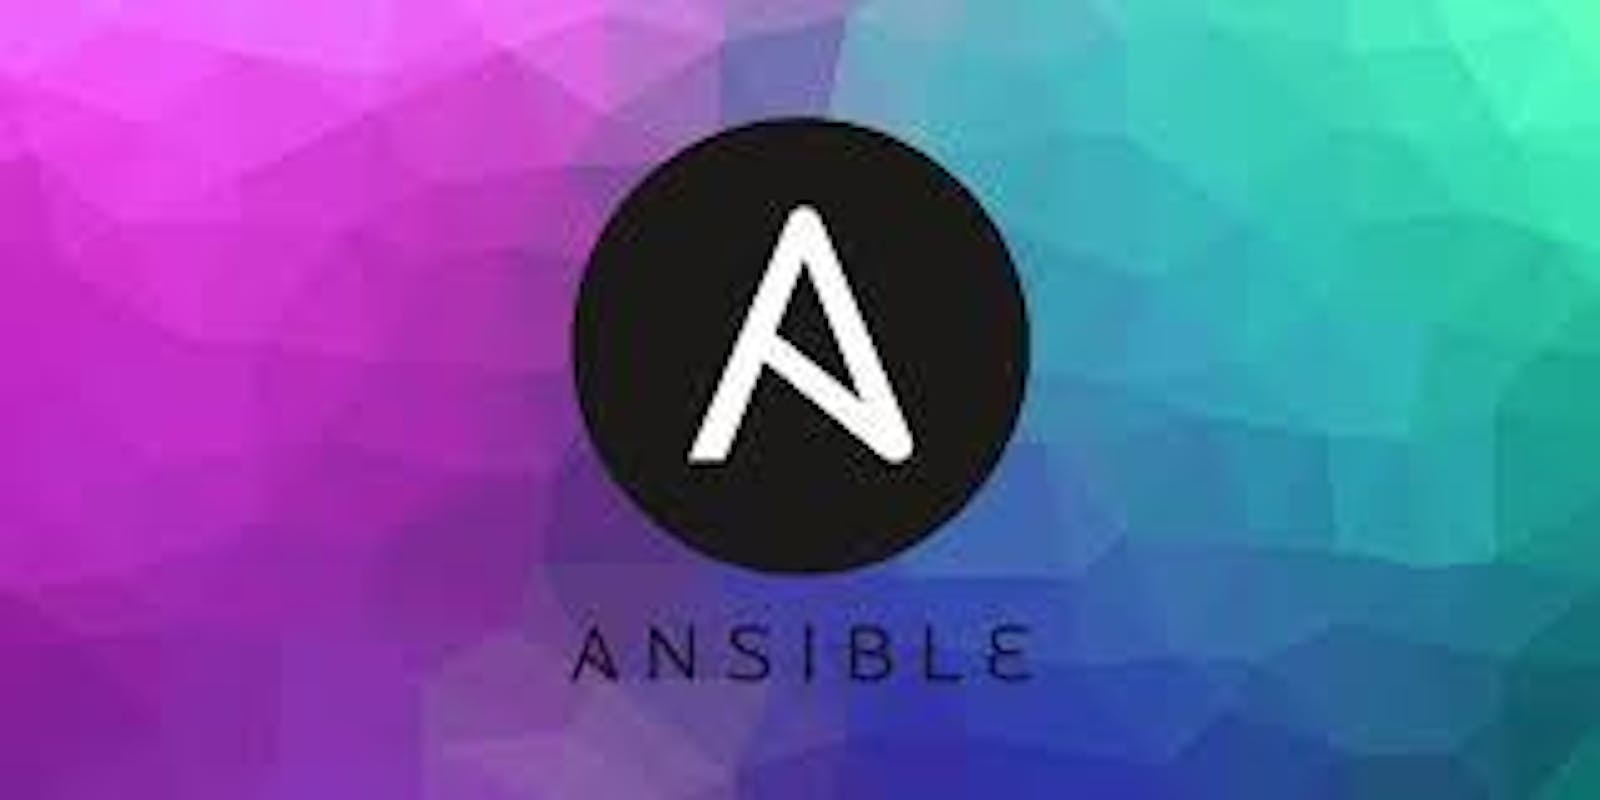 Day 55: Understanding Configuration Management with Ansible